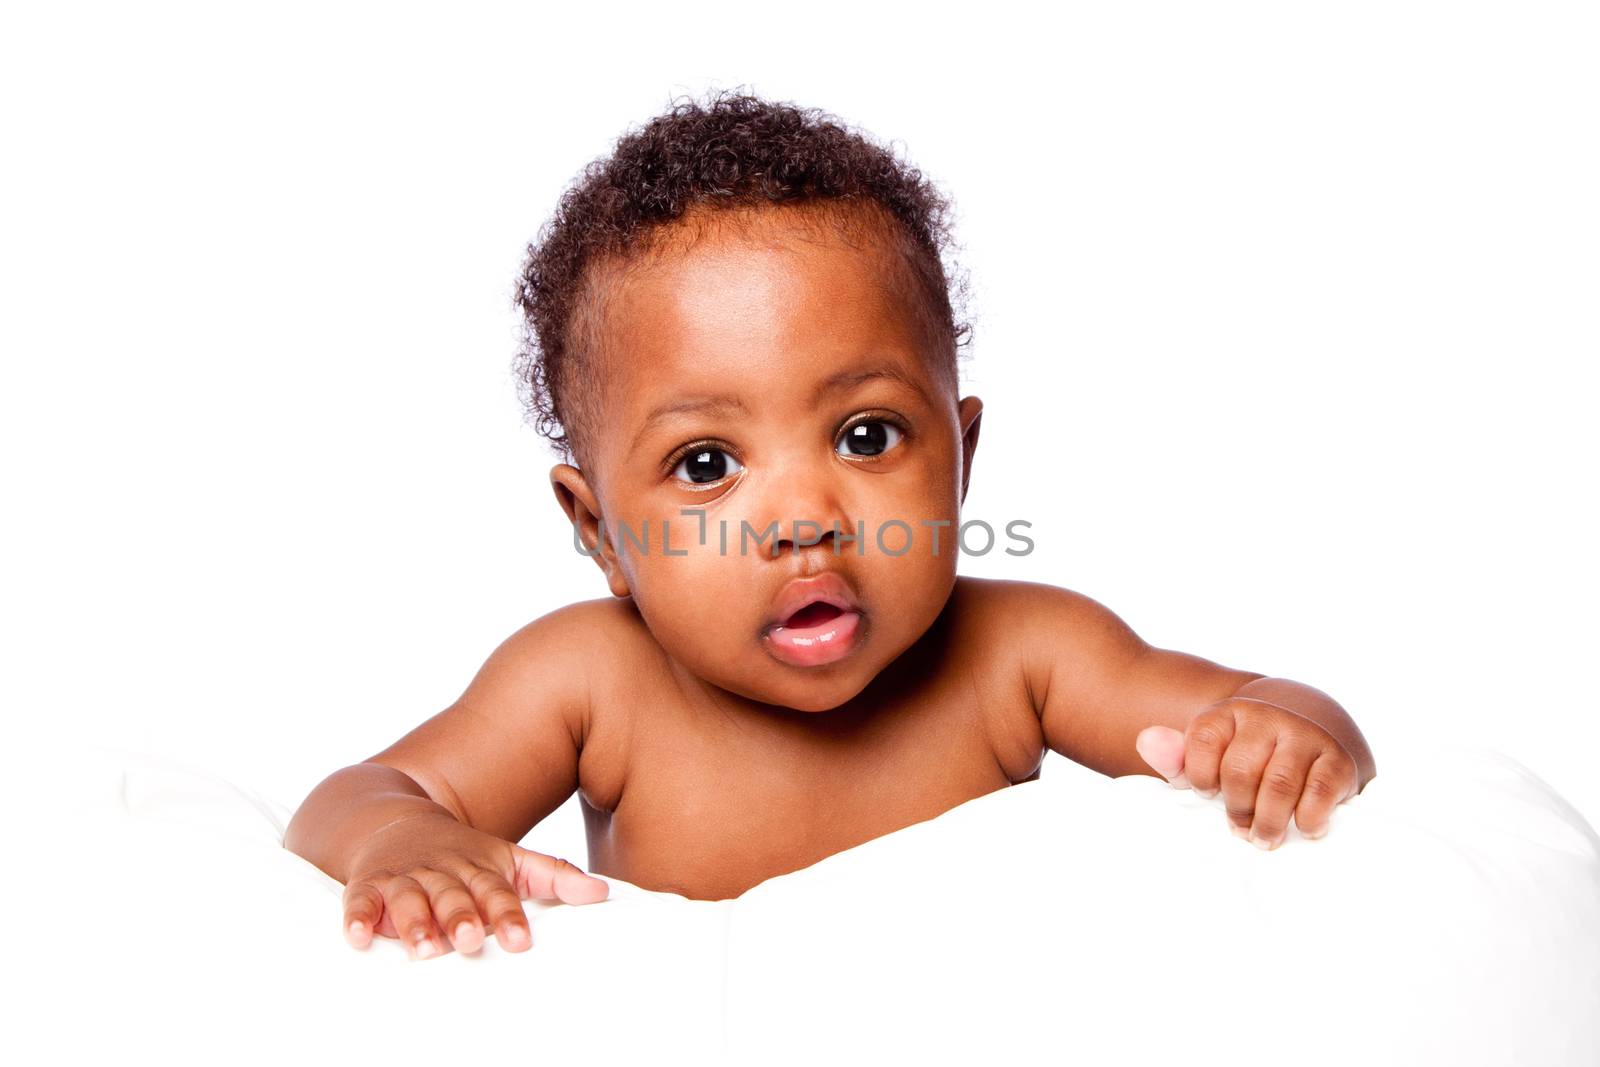 Adorable cute African infant baby face with curly hair, on white.